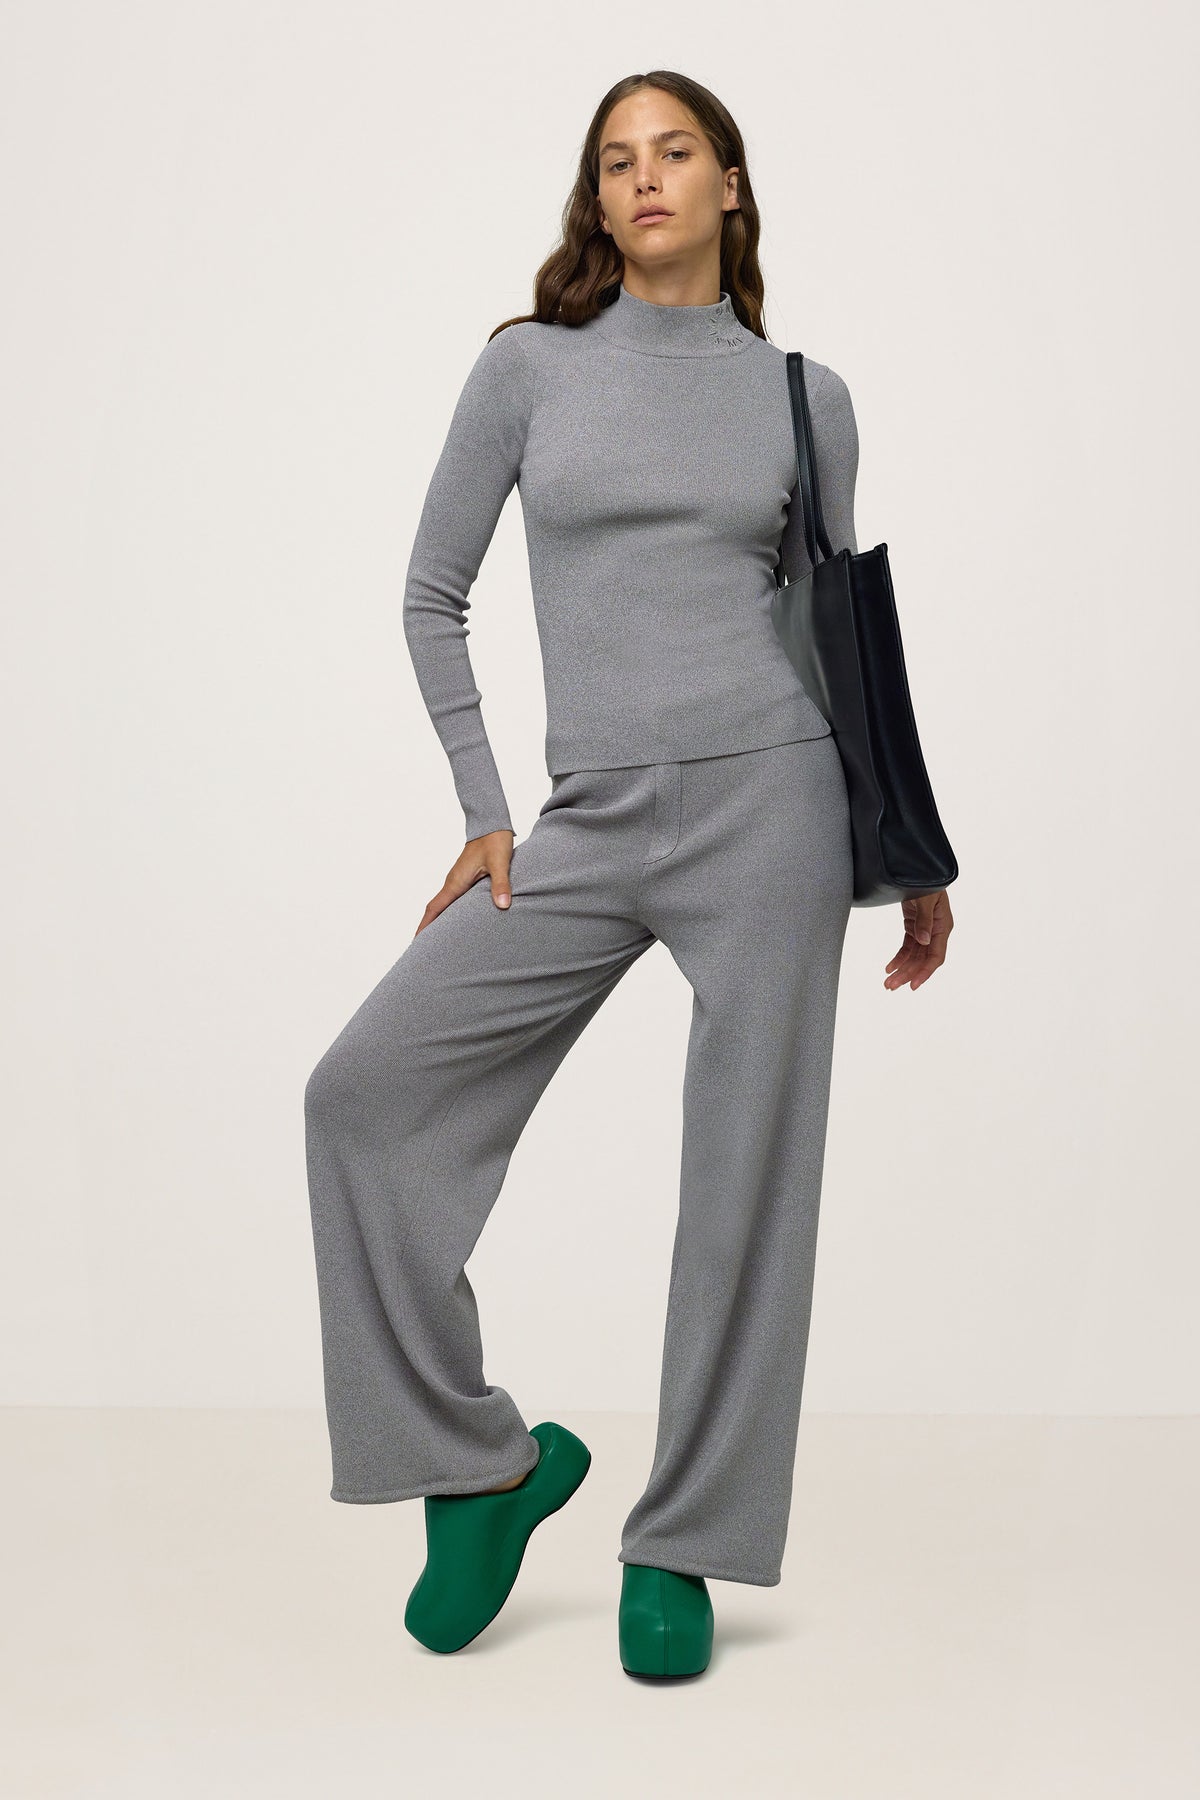 Knits By Rohe Top in Heather Grey